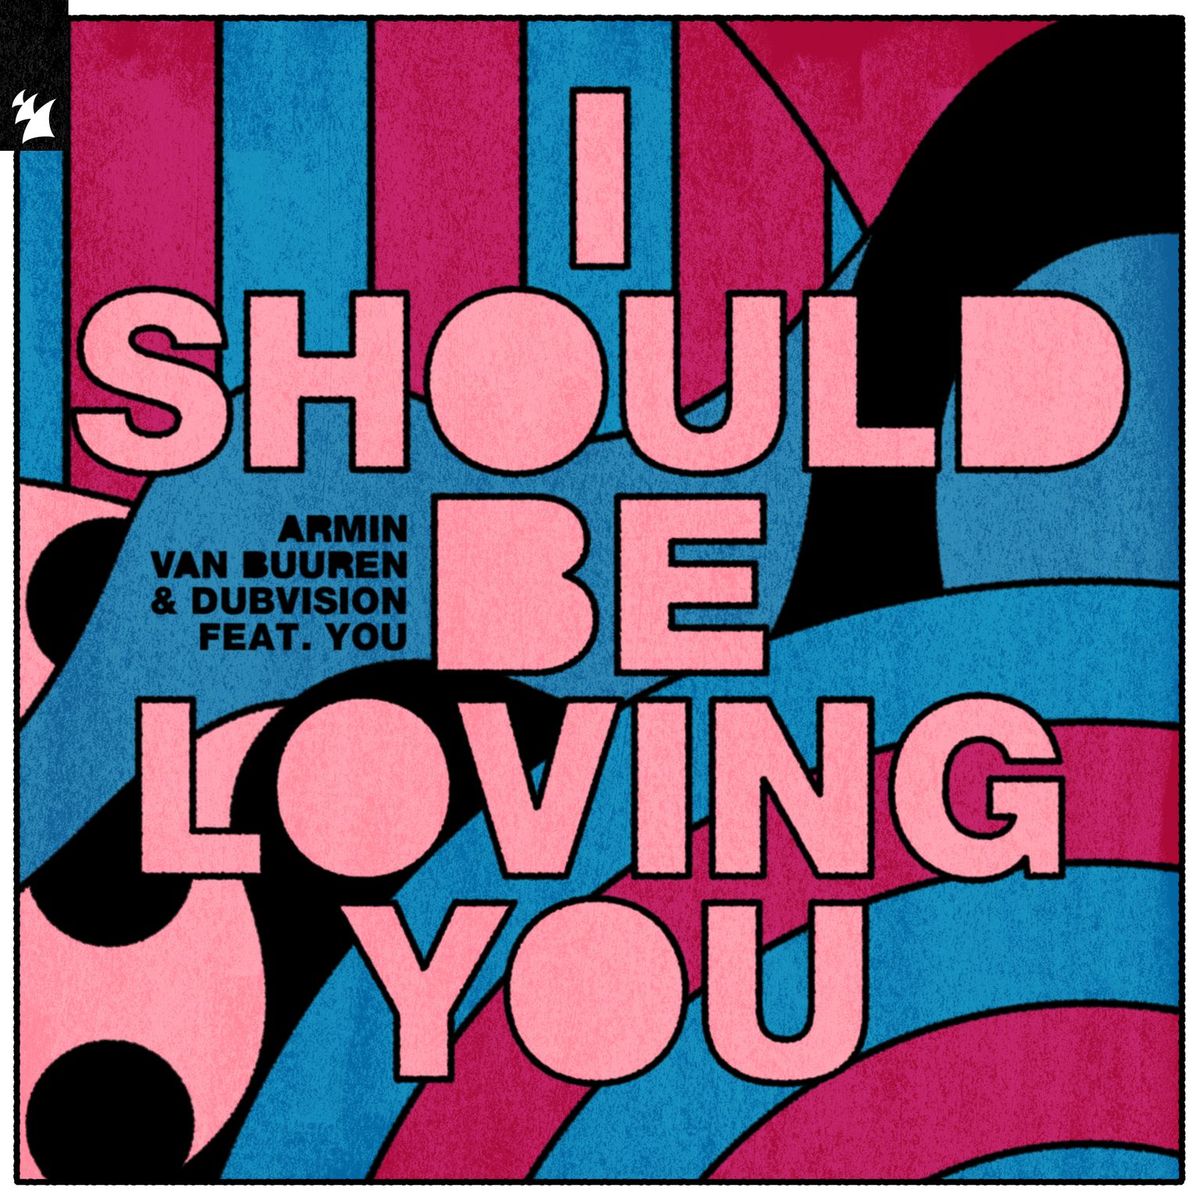 Armin van Buuren and DubVision feat. YOU presents I Should Be Lovin You on Armada Music